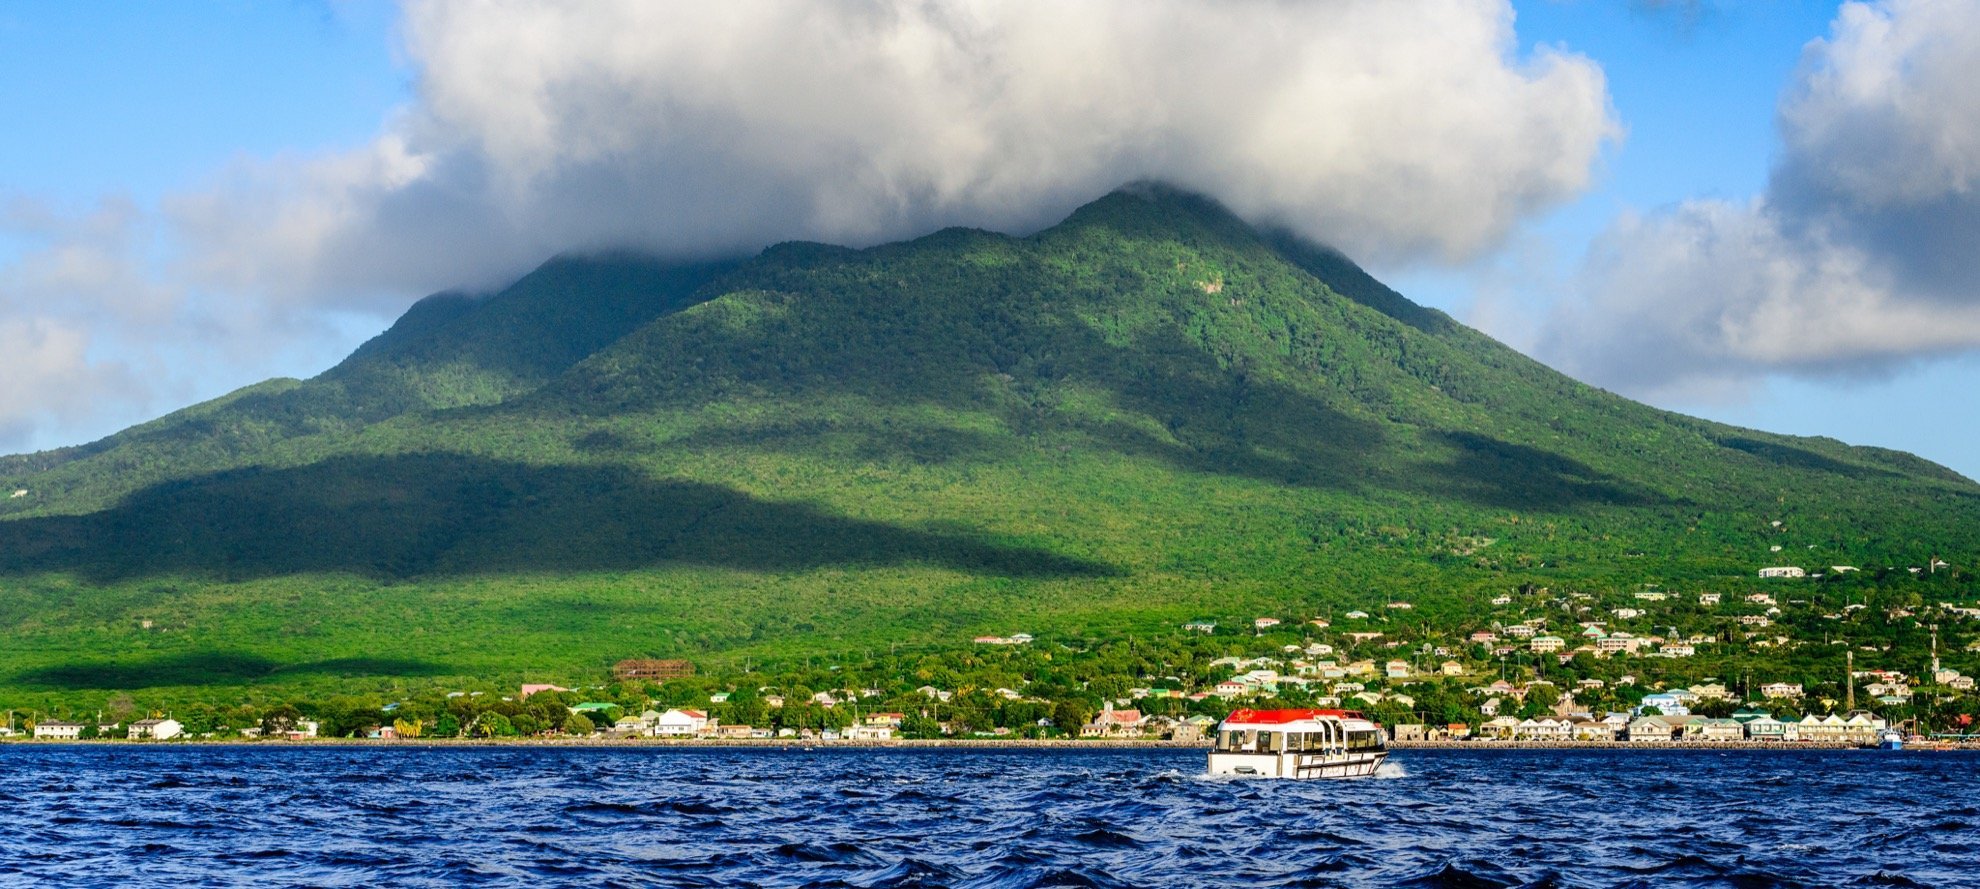 The Caribbean Island Of Nevis: Where To Stay And What To Eat